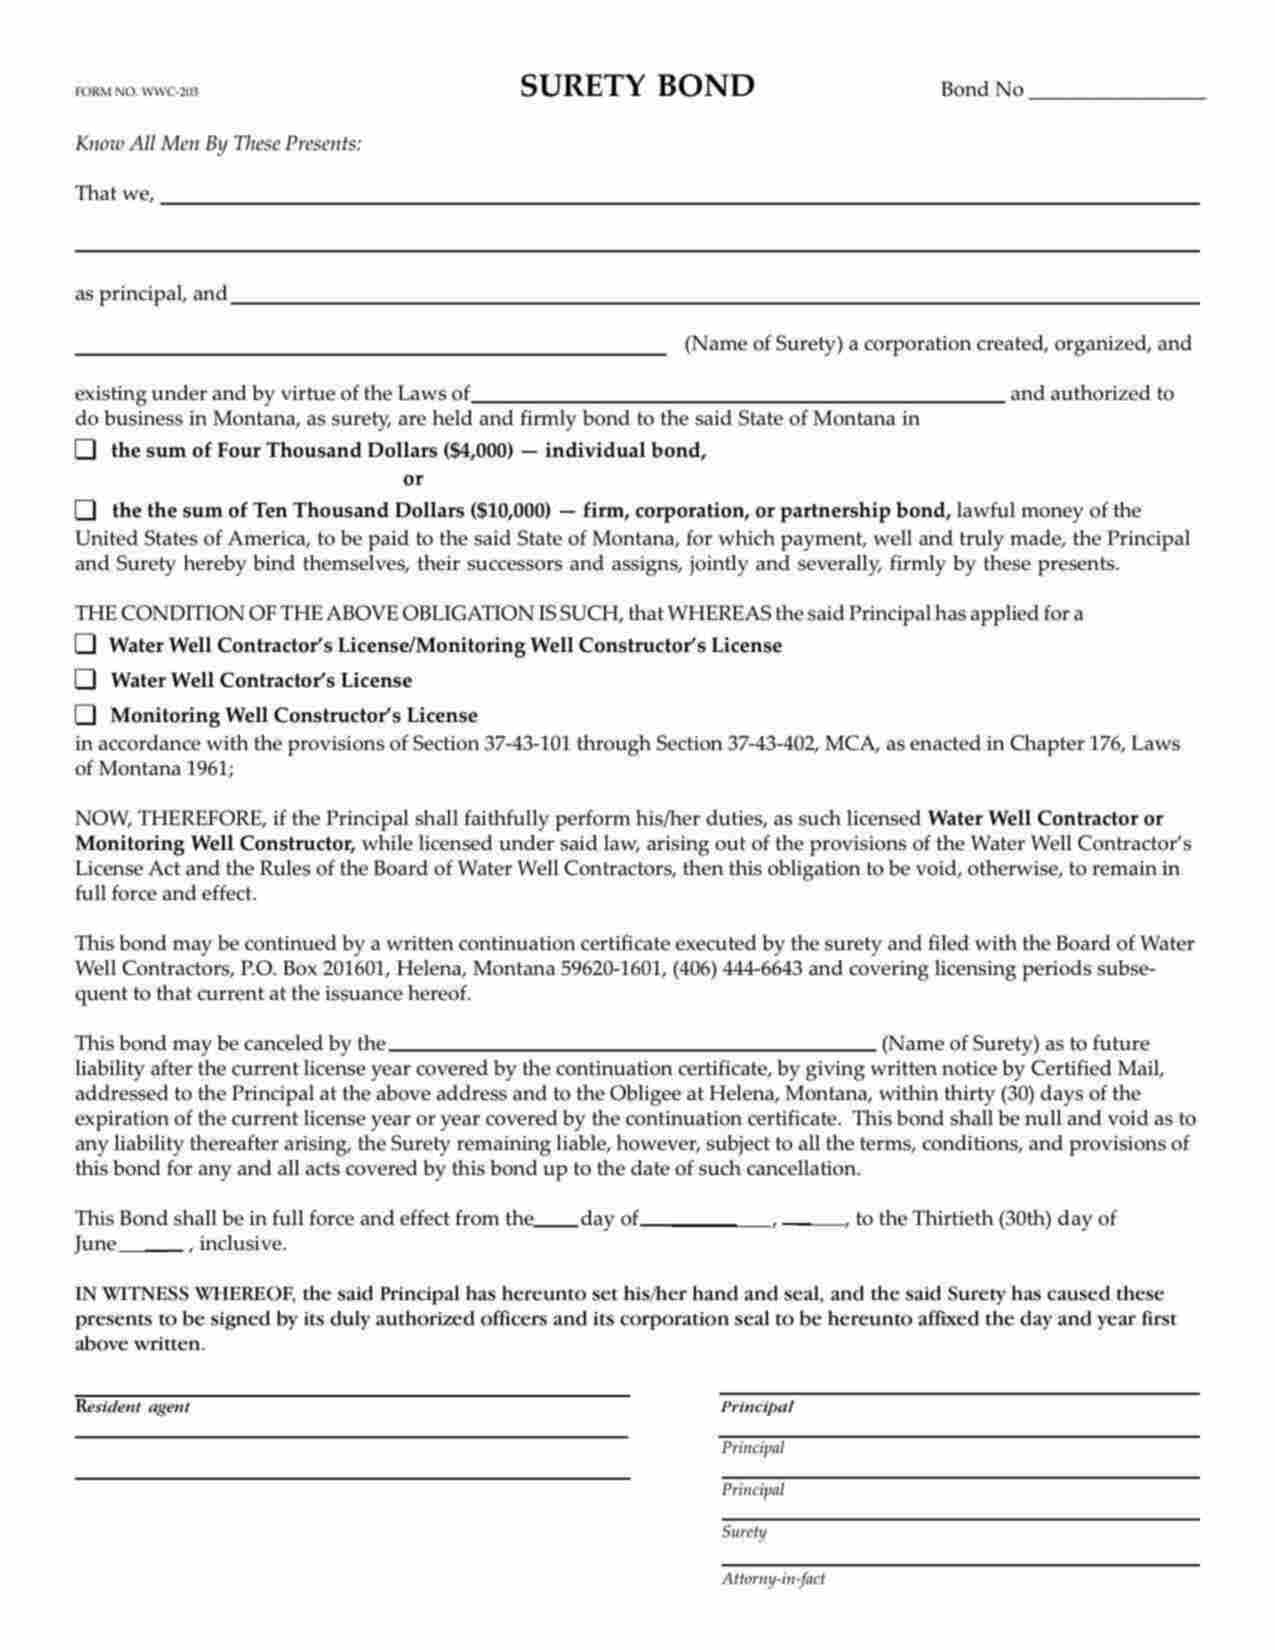 Montana Water Well Contractor's License Bond Form